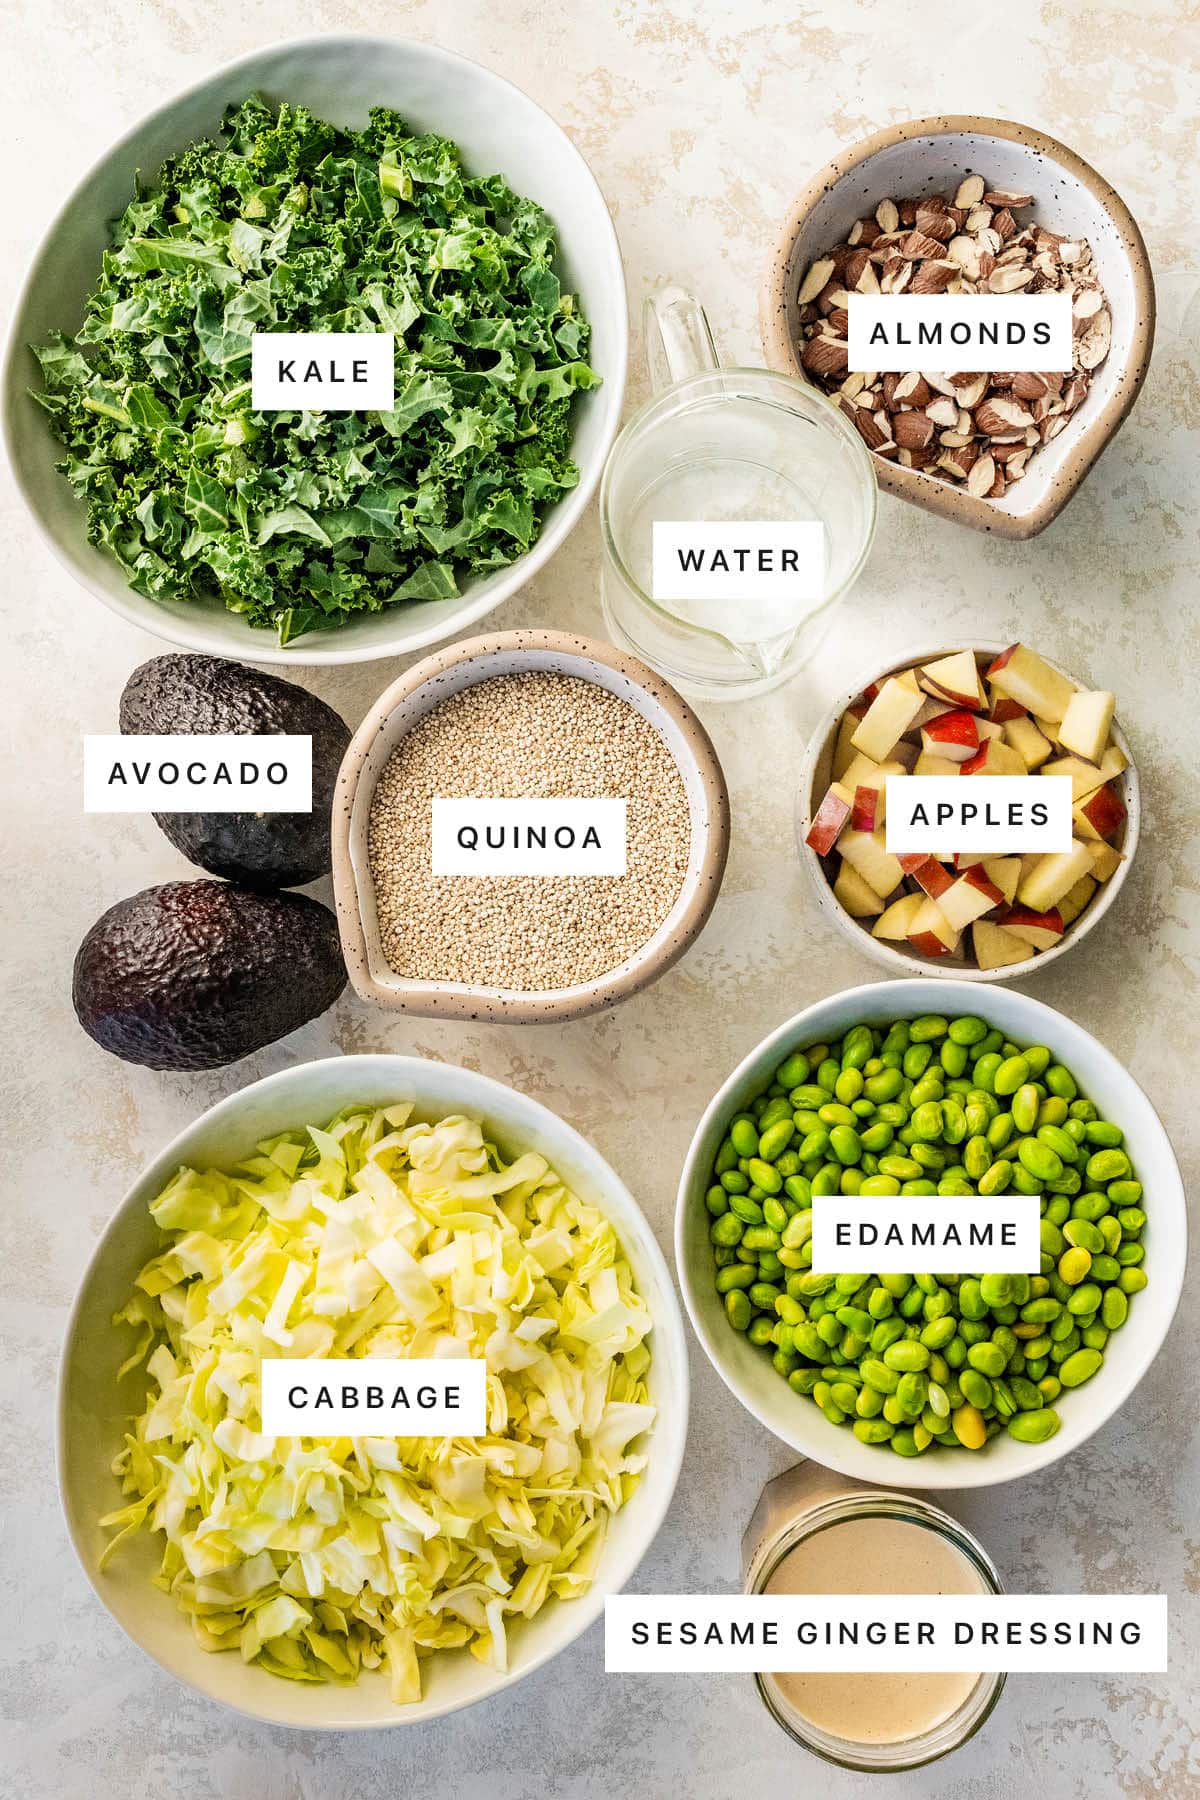 Ingredients measured out to make Meal Prep Edamame Salad: kale, almonds, water, quinoa, avocado, apples, cabbage, edamame and sesame ginger dressing.